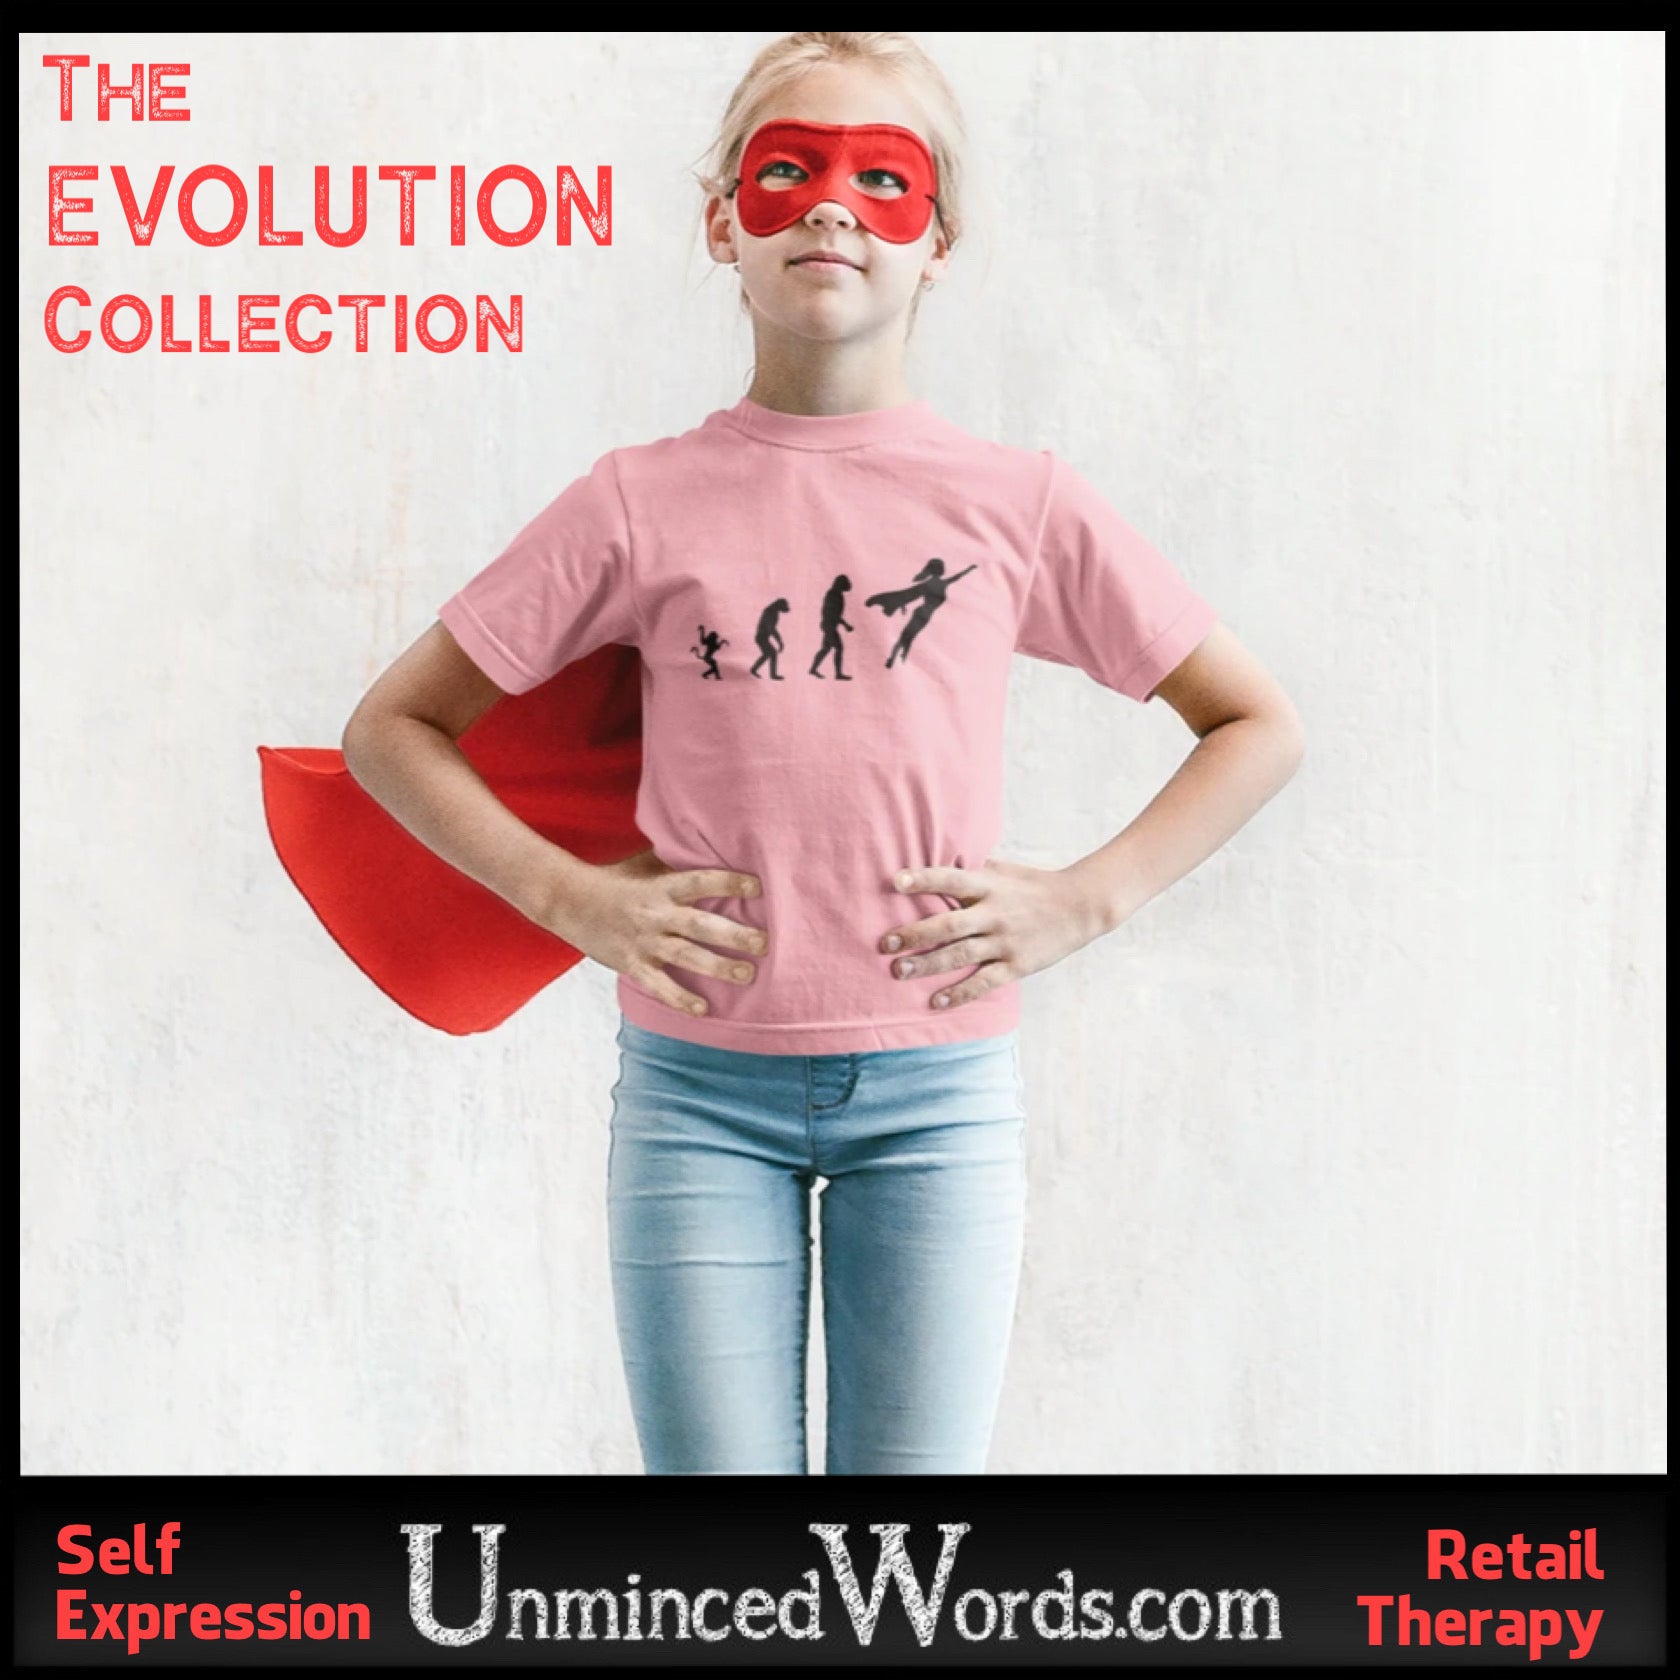 Evolution is a collection for women and girls